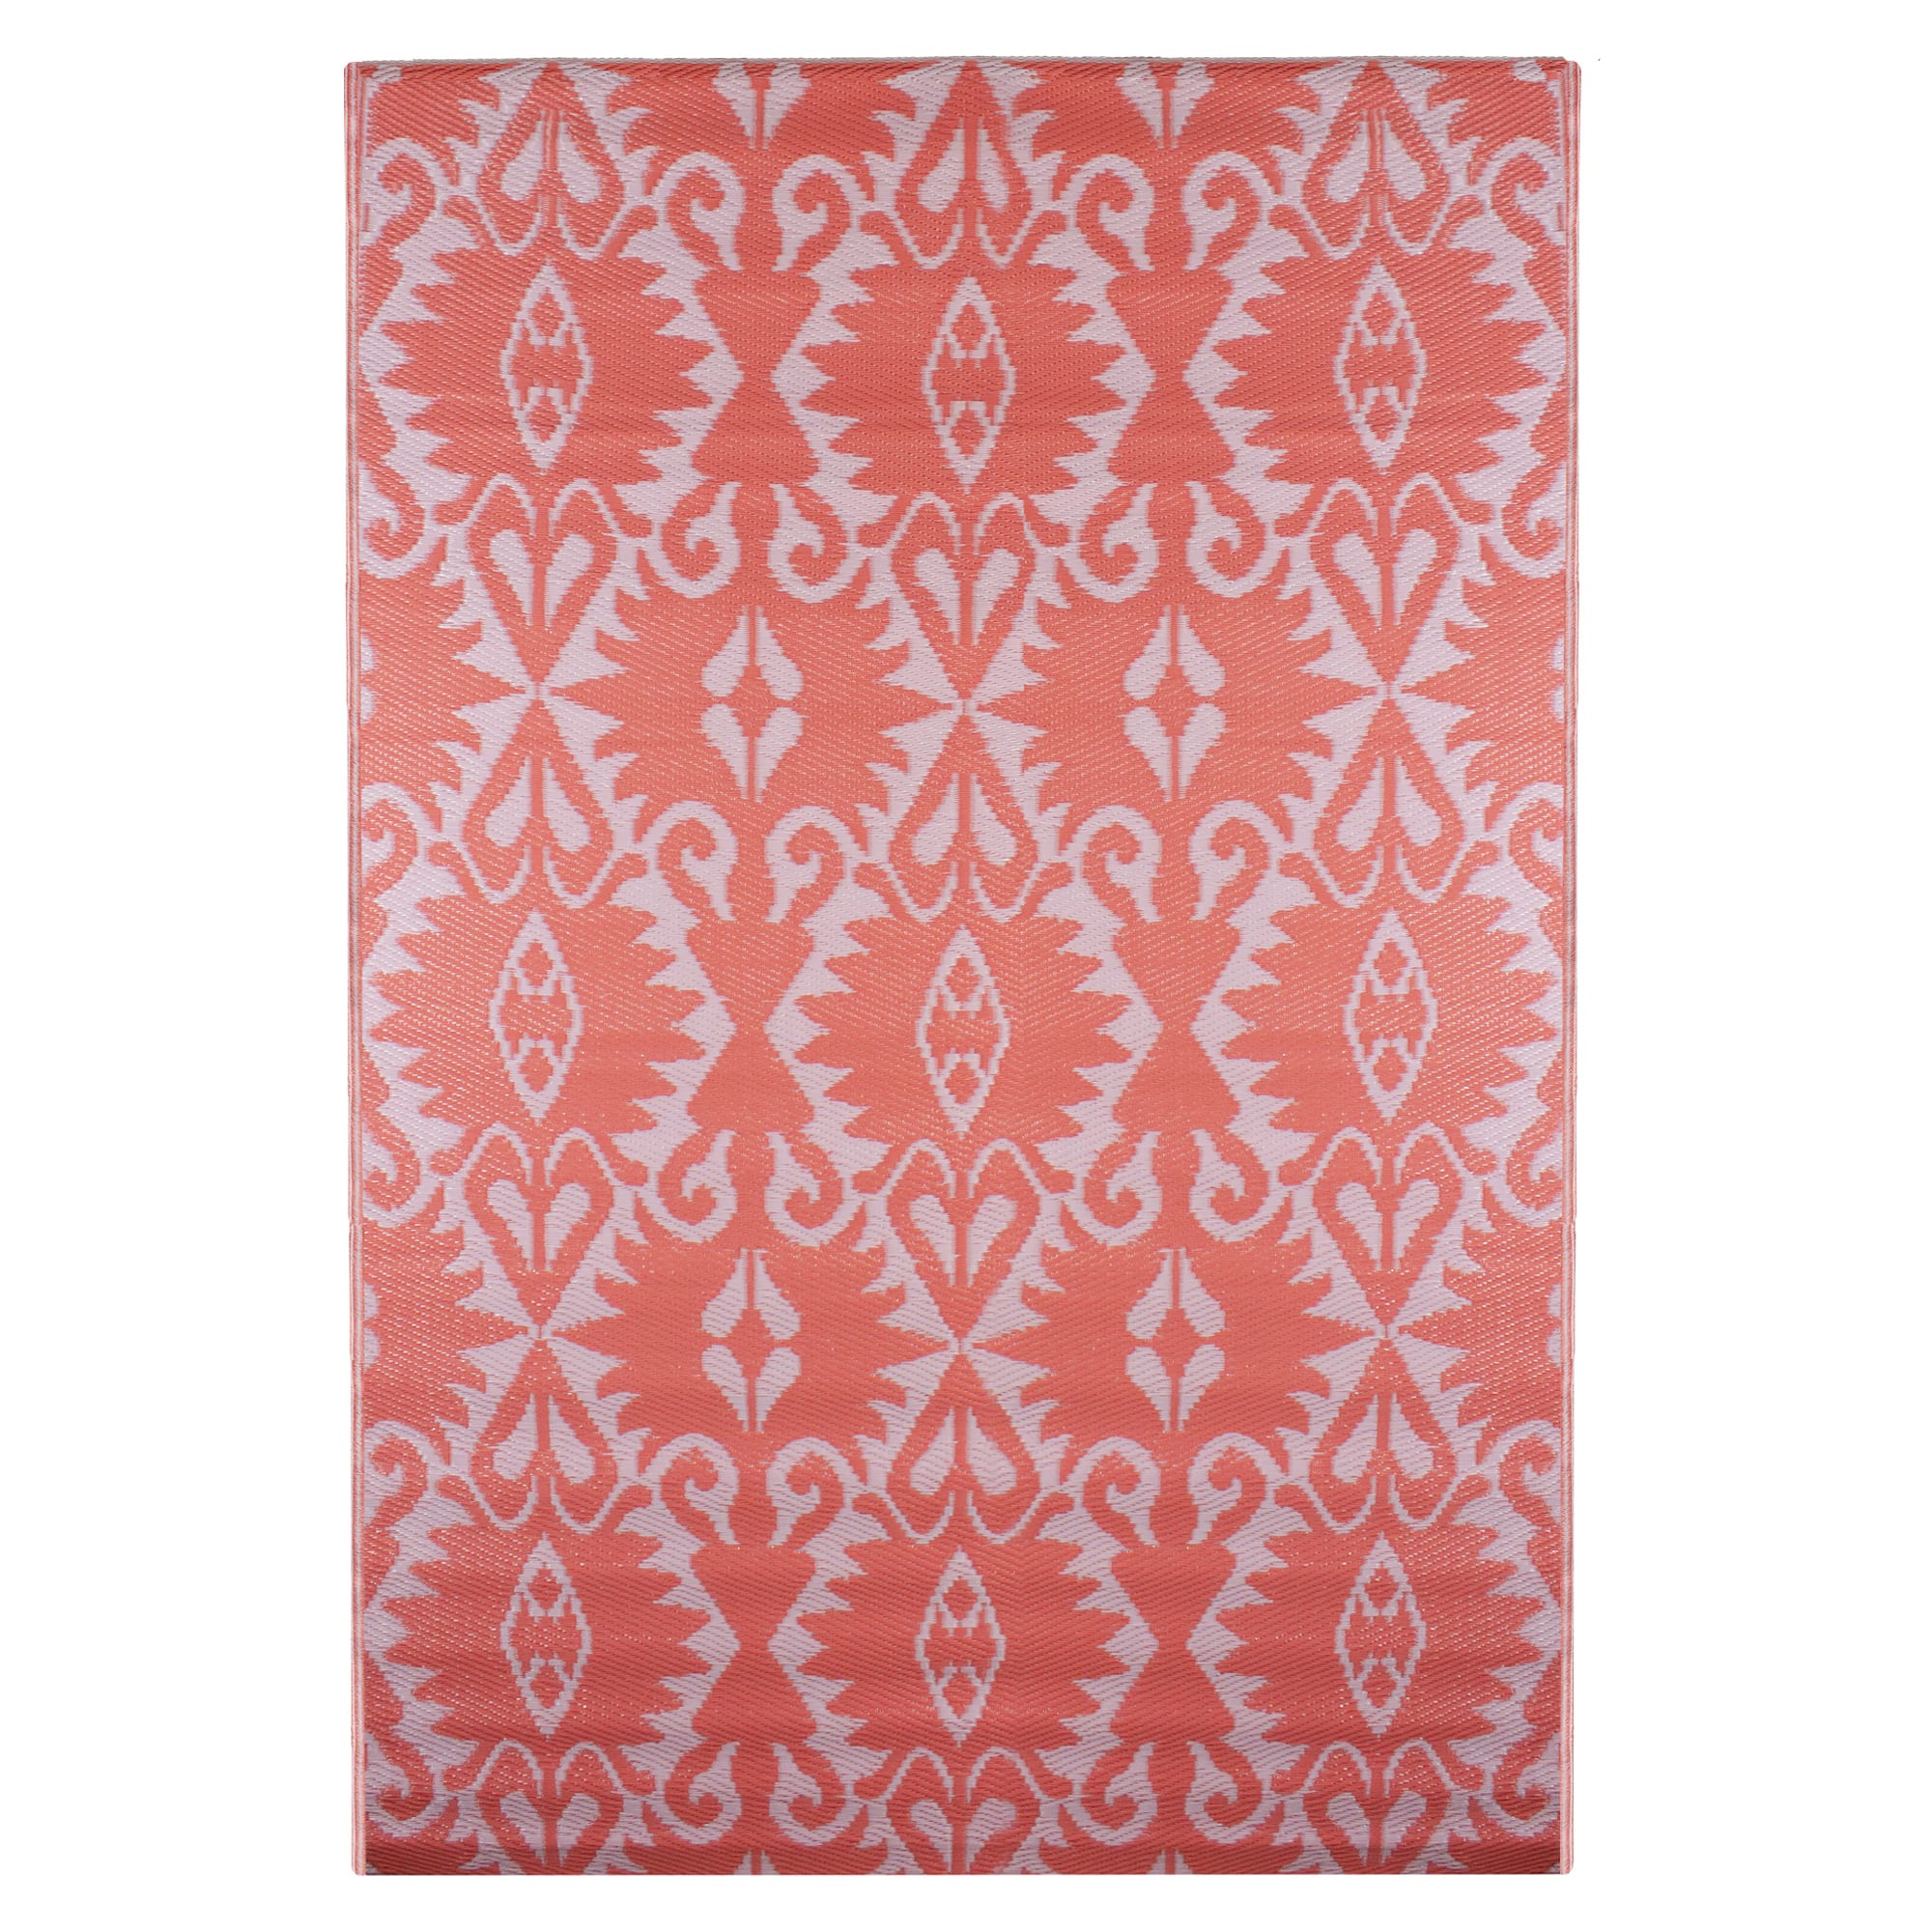 Pink Abstract Pattern Rectangular Outdoor Area Rug, 4ft. x 6ft.